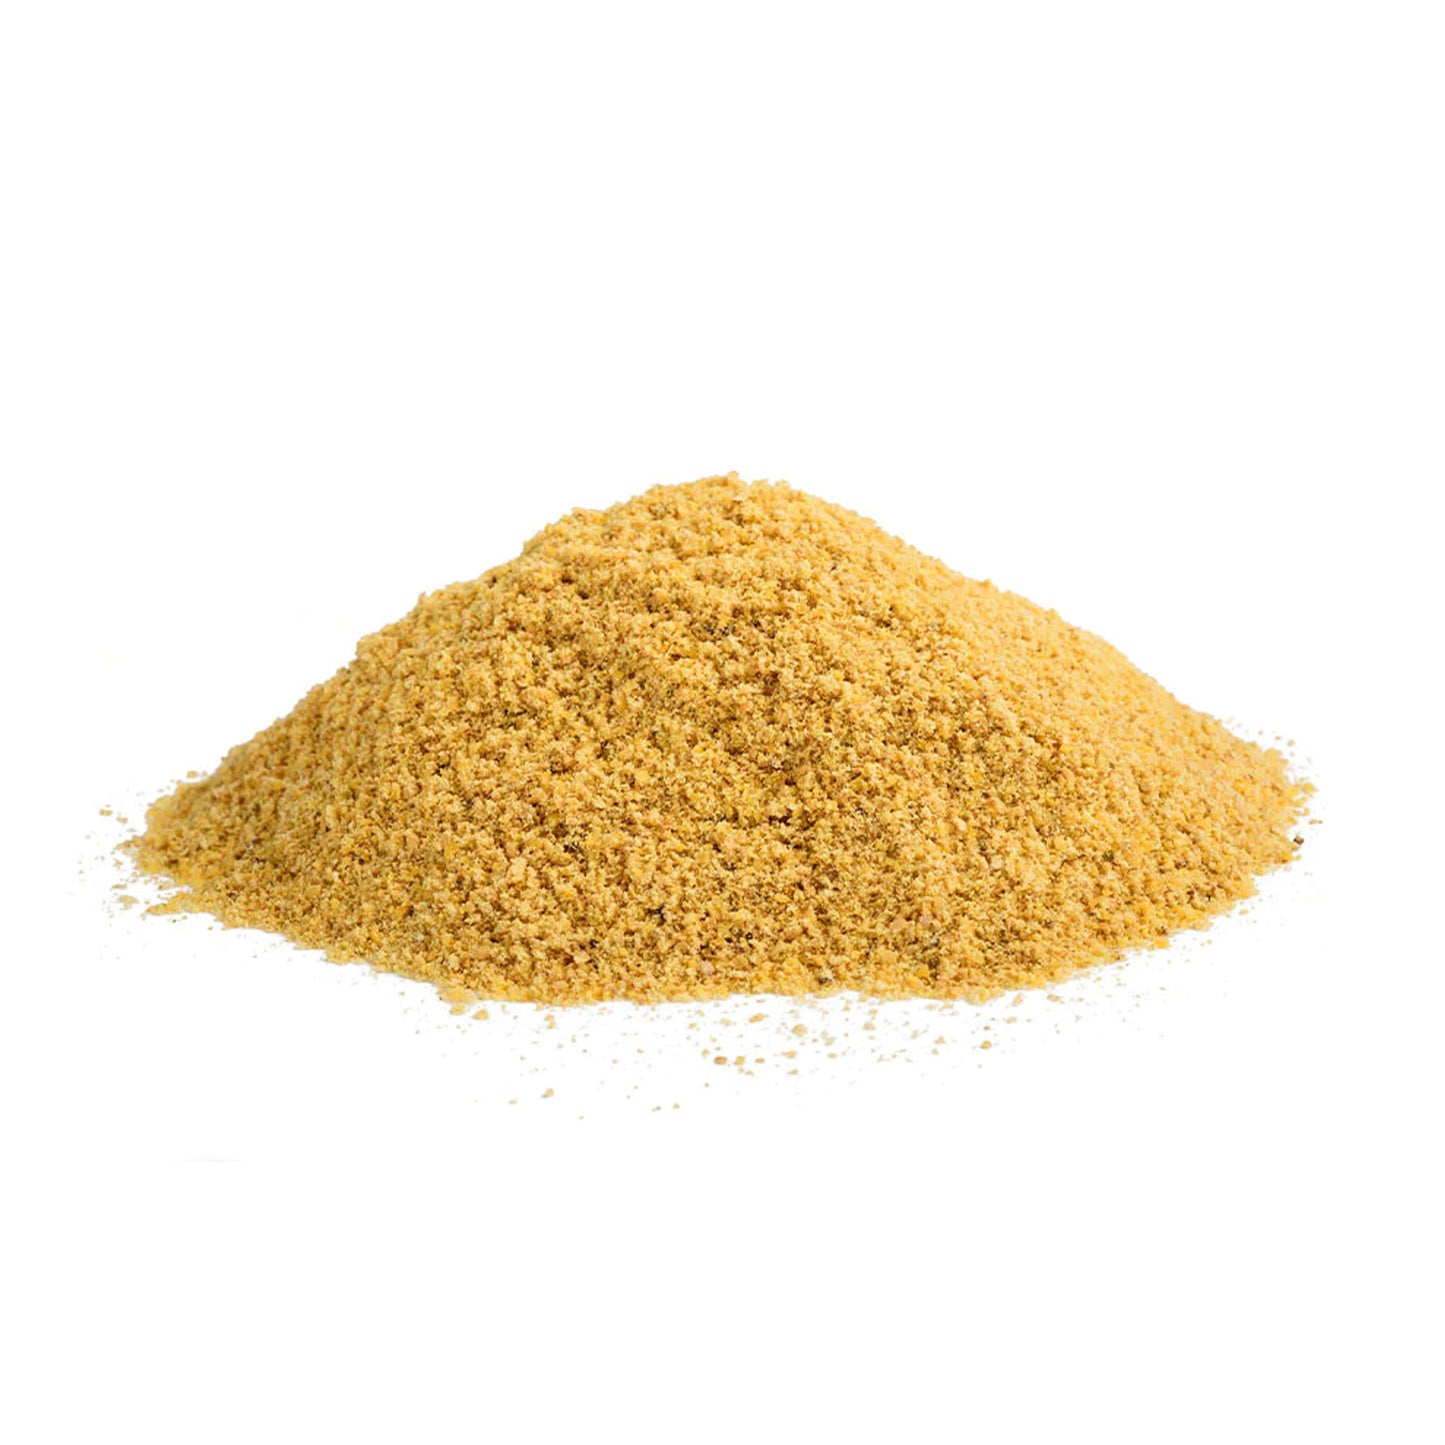 Add a zesty kick to your culinary creations with our organic yellow mustard powder, packed with bold flavor and conveniently sized at 0.19 lb.